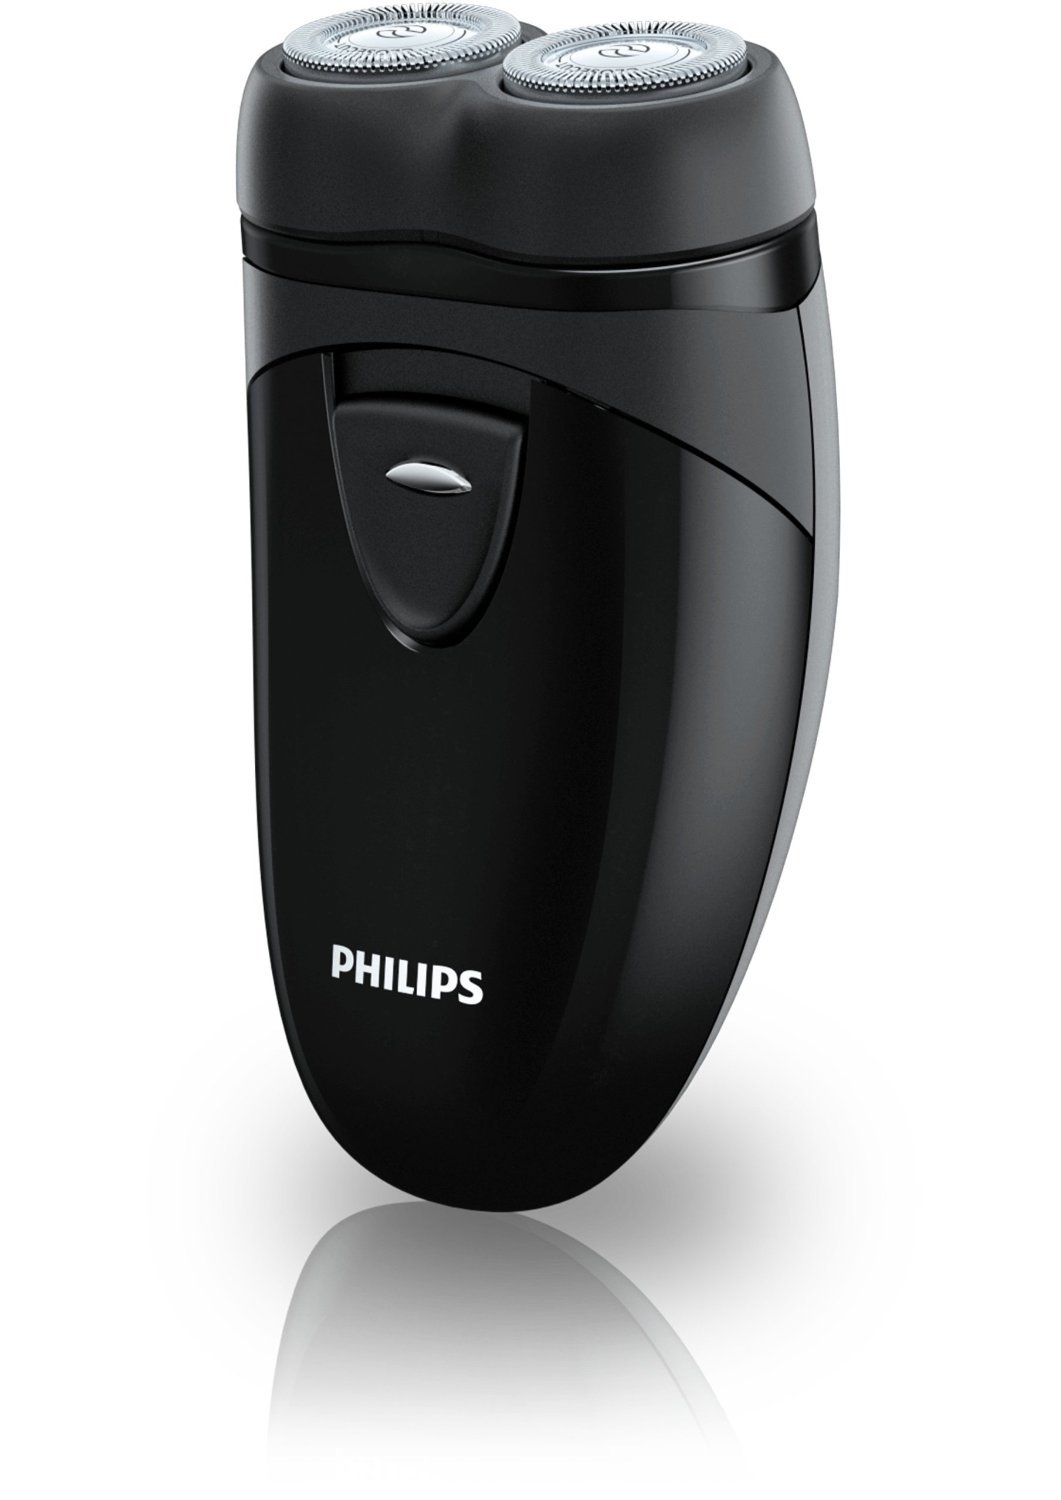 Norelco Travel Men's Shaver with Close-Cut Technology and Independent Floating Heads, Self-Sharpening Blades, 2 x AA Batteries Included by Philips